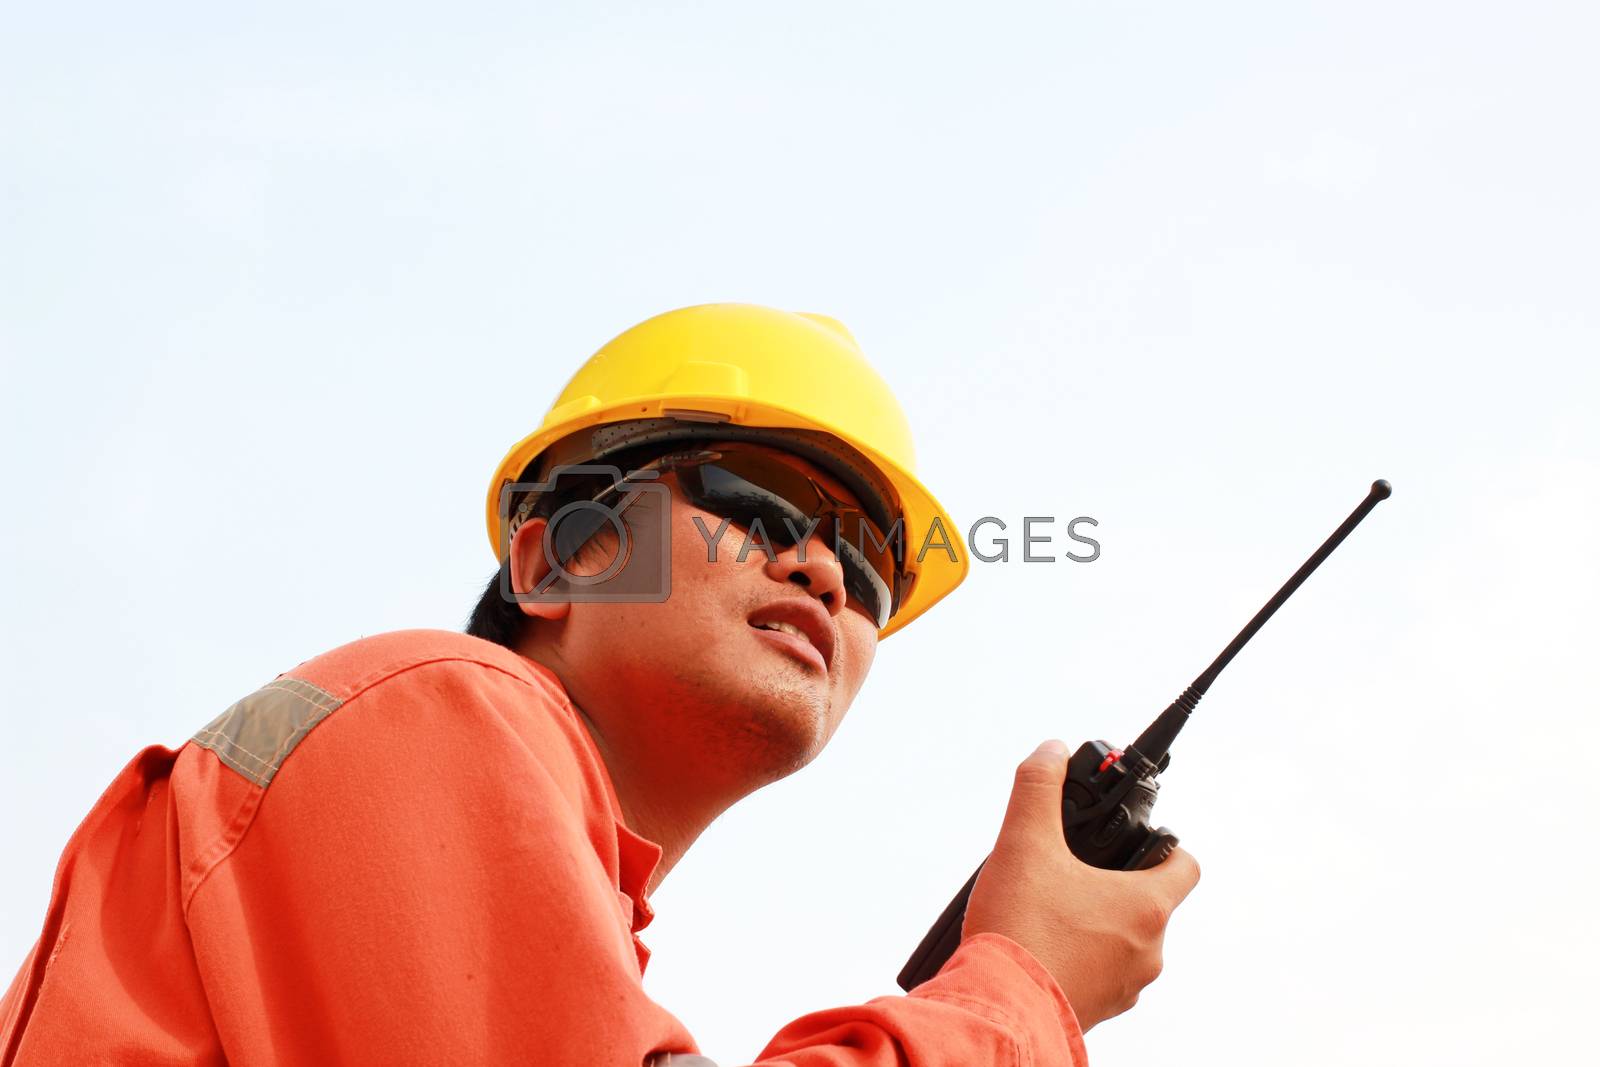 Royalty free image of isolated white background. young man communicating on walkie-talkie at site by ZONETEEn